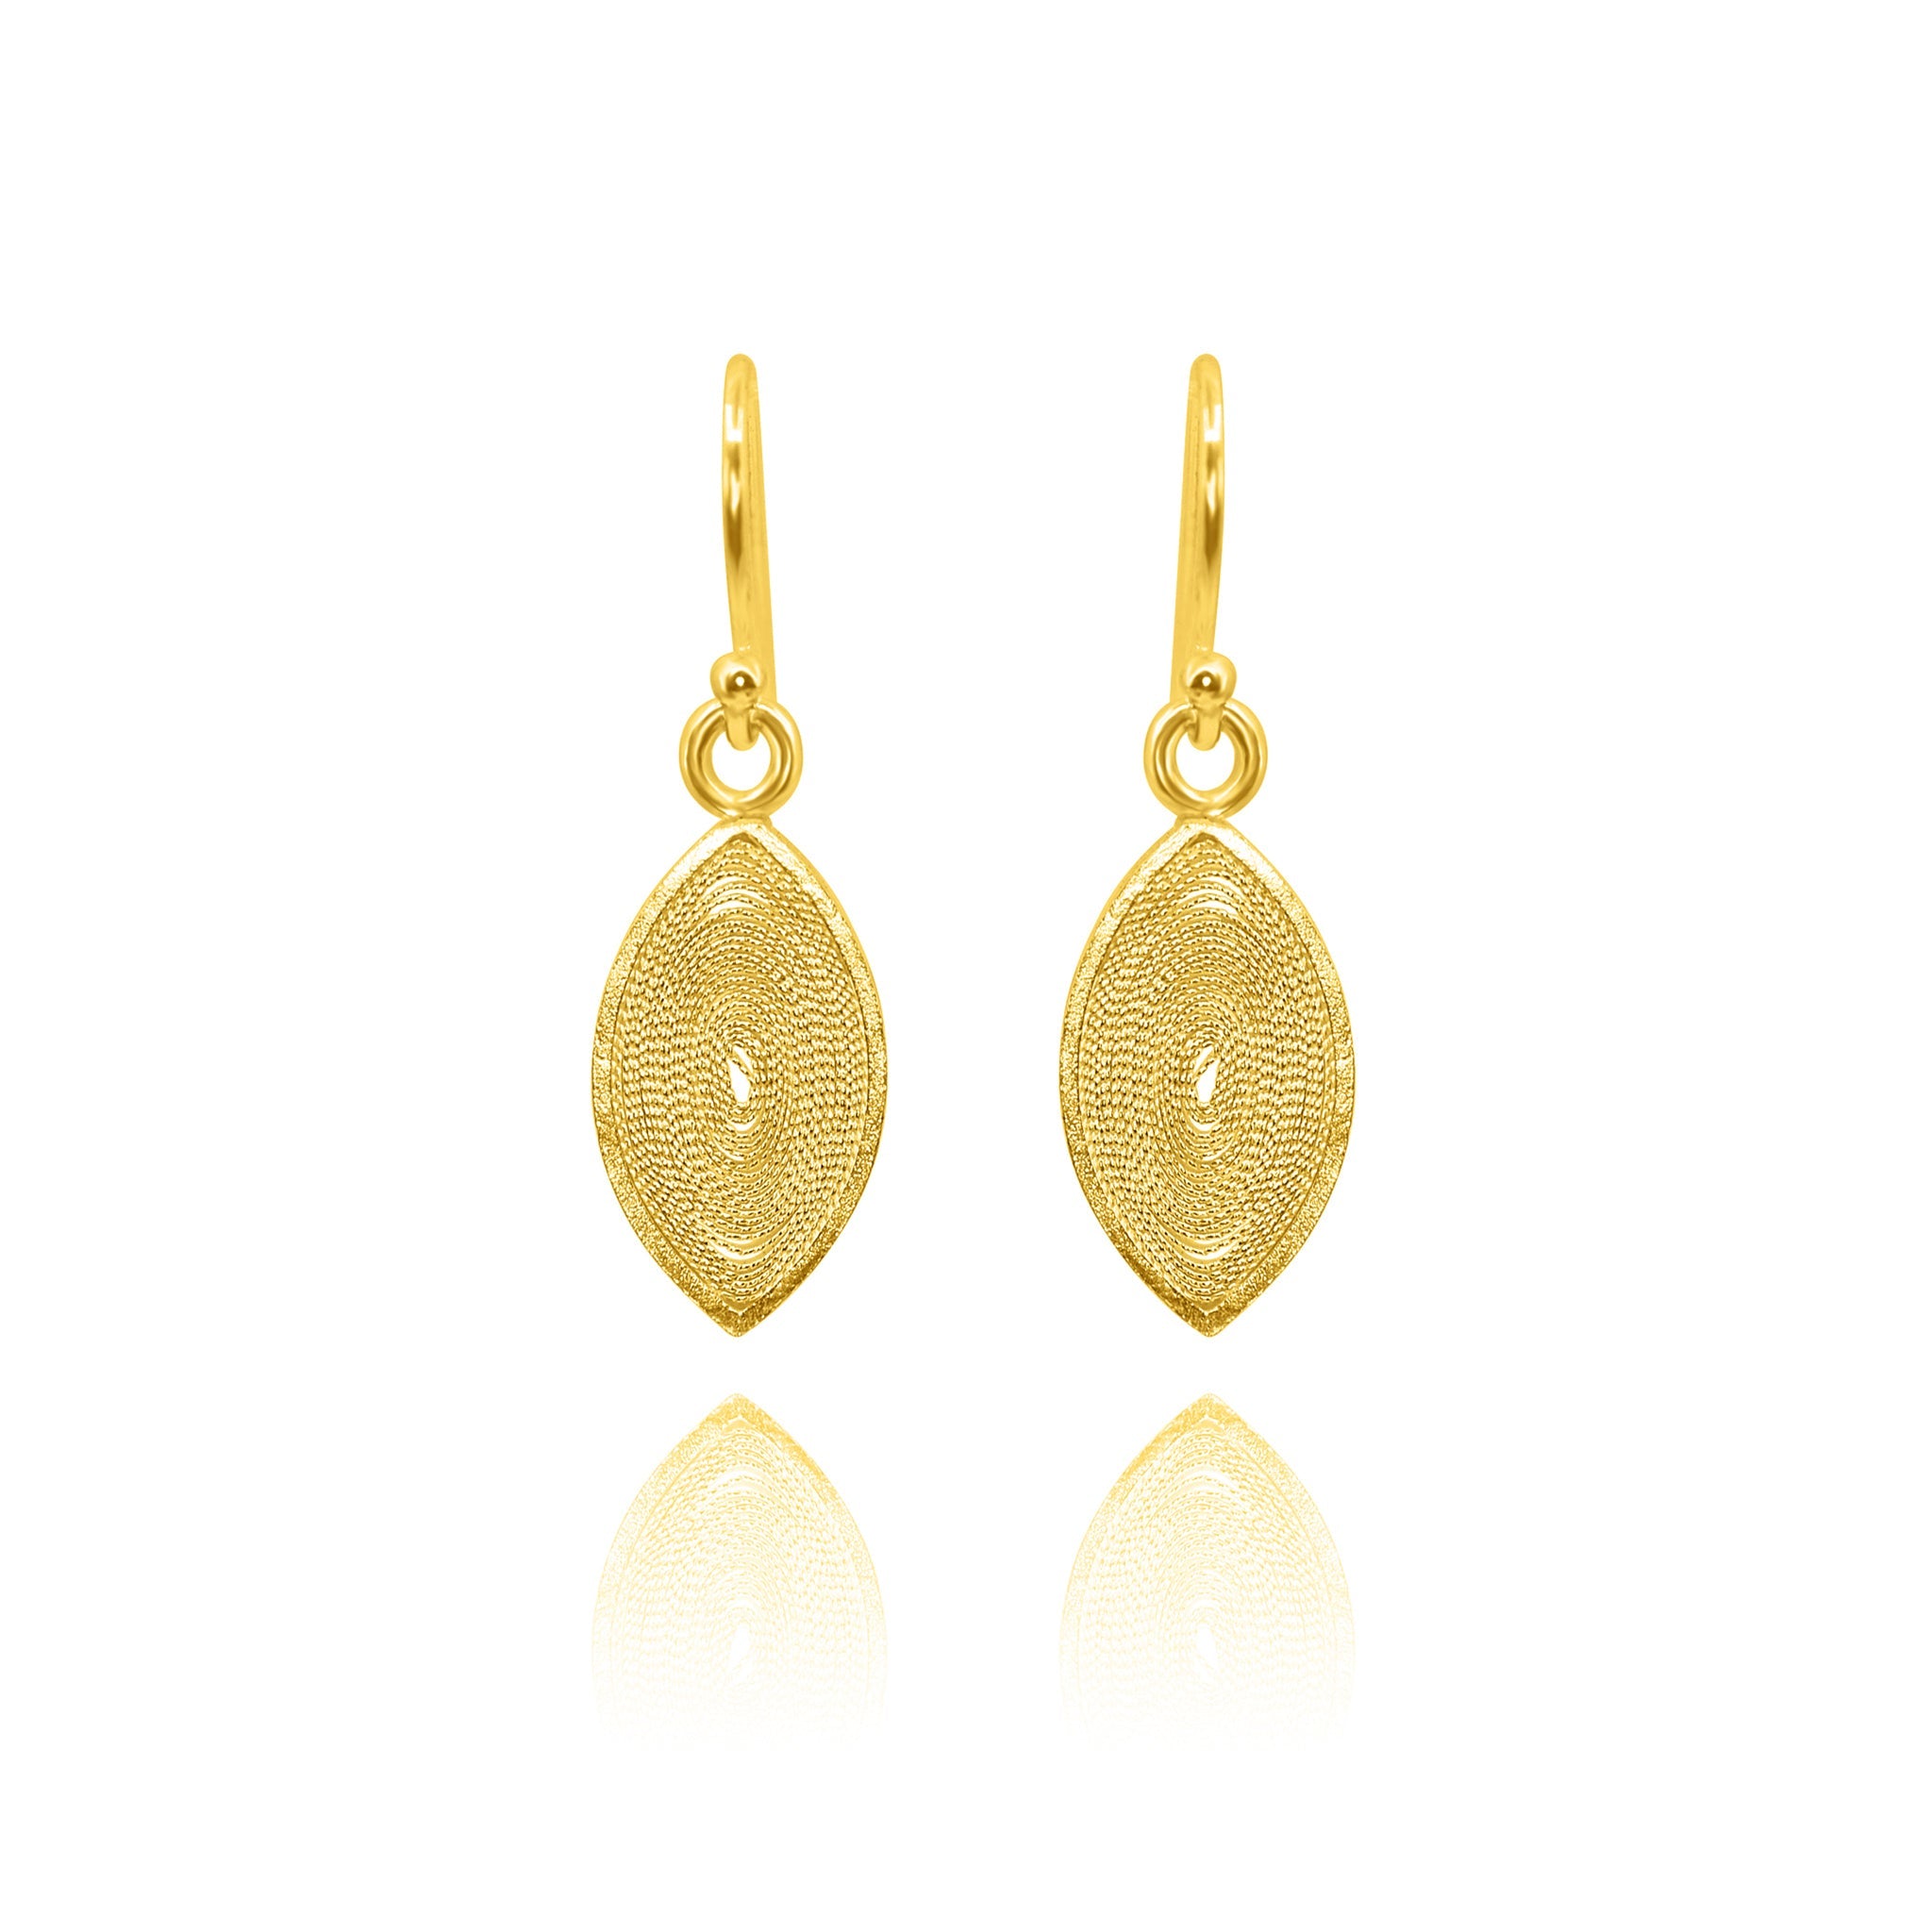 MABELY GOLD SMALL EARRINGS FILIGREE